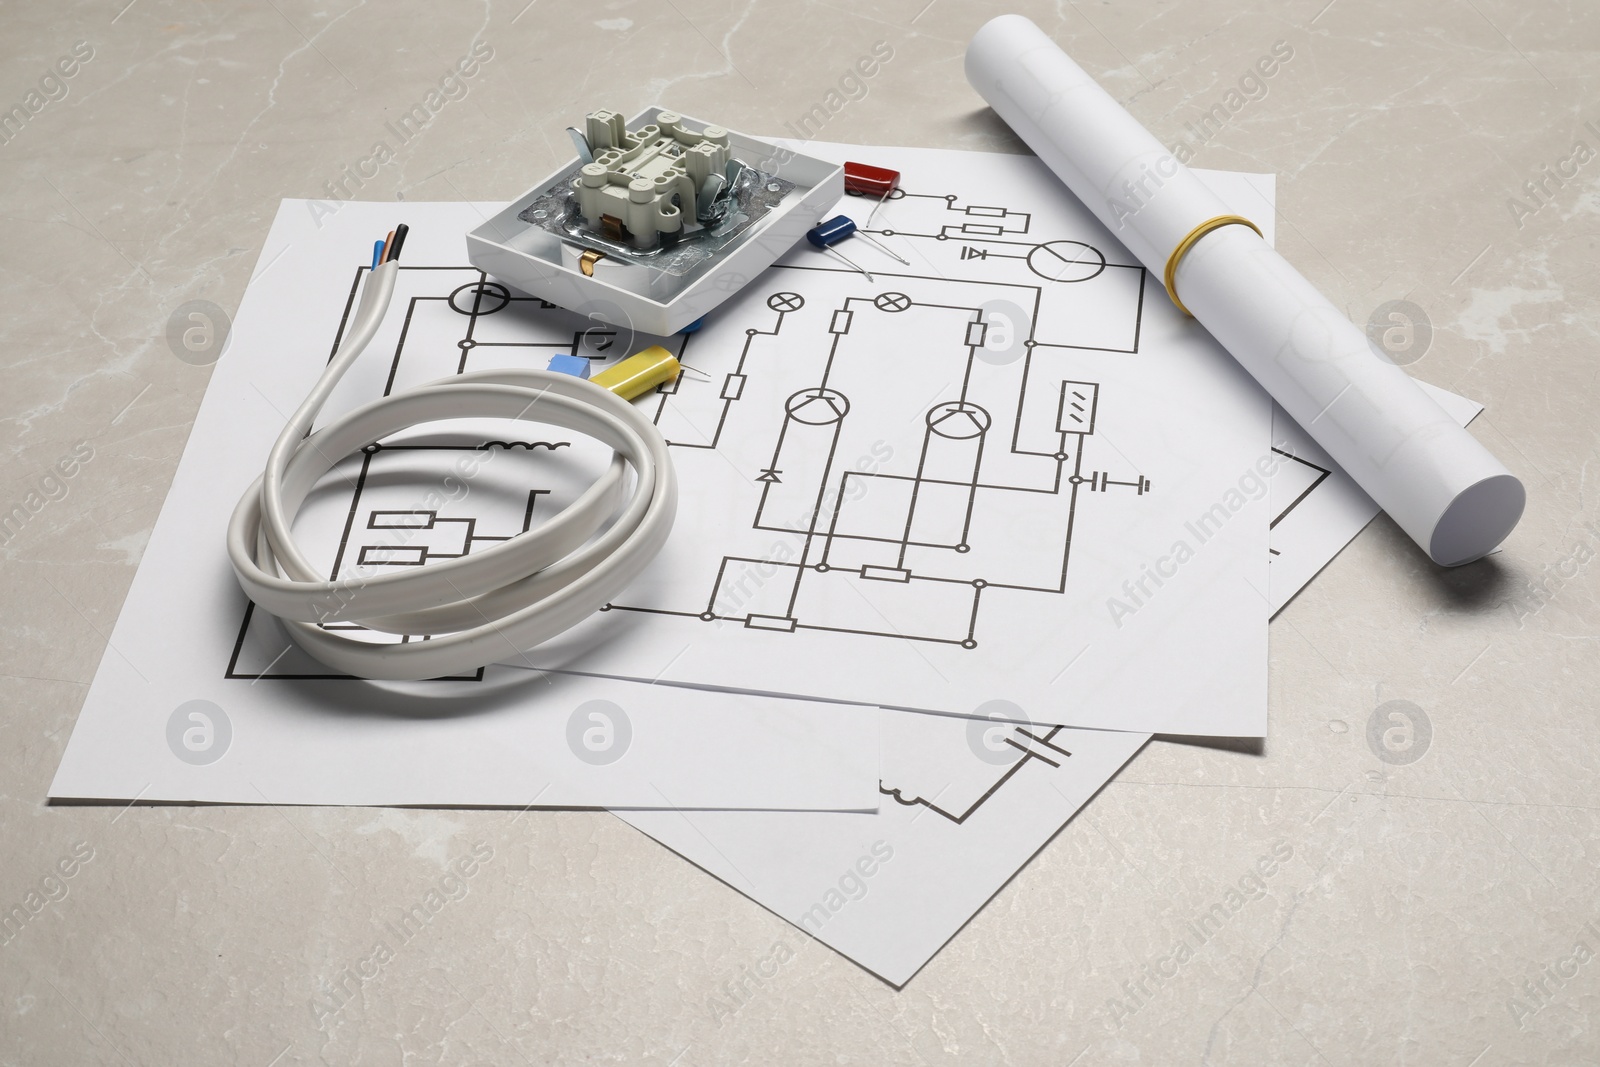 Photo of Wiring diagrams, wires and disassembled light switch on table